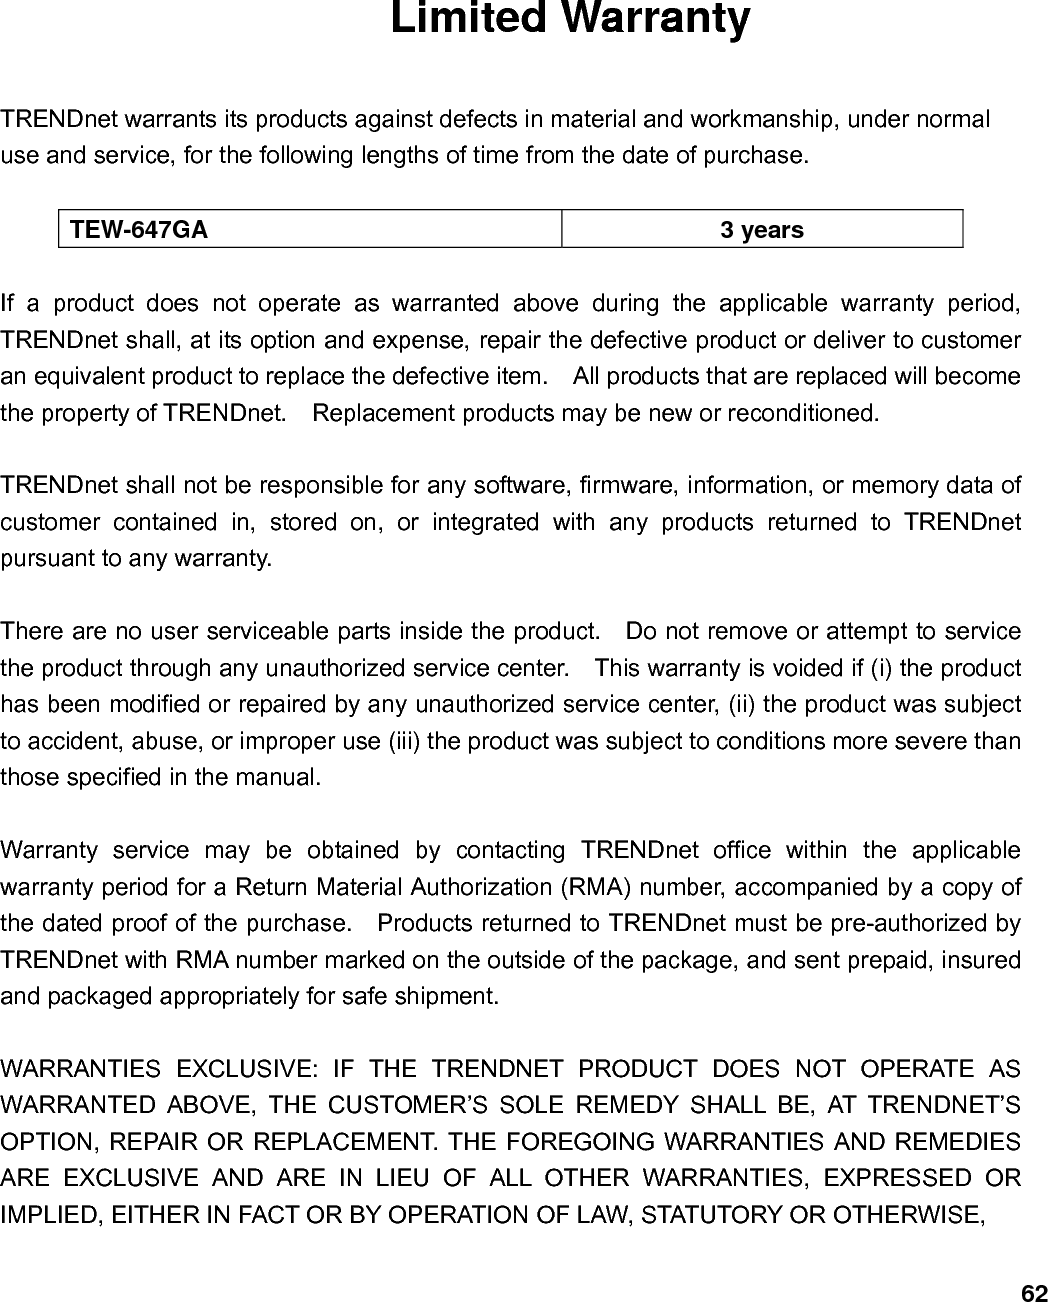                             62Limited Warranty  TRENDnet warrants its products against defects in material and workmanship, under normal use and service, for the following lengths of time from the date of purchase.      TEW-647GA 3 years  If a product does not operate as warranted above during the applicable warranty period, TRENDnet shall, at its option and expense, repair the defective product or deliver to customer an equivalent product to replace the defective item.    All products that are replaced will become the property of TRENDnet.    Replacement products may be new or reconditioned.  TRENDnet shall not be responsible for any software, firmware, information, or memory data of customer contained in, stored on, or integrated with any products returned to TRENDnet pursuant to any warranty.  There are no user serviceable parts inside the product.    Do not remove or attempt to service the product through any unauthorized service center.    This warranty is voided if (i) the product has been modified or repaired by any unauthorized service center, (ii) the product was subject to accident, abuse, or improper use (iii) the product was subject to conditions more severe than those specified in the manual.  Warranty service may be obtained by contacting TRENDnet office within the applicable warranty period for a Return Material Authorization (RMA) number, accompanied by a copy of the dated proof of the purchase.    Products returned to TRENDnet must be pre-authorized by TRENDnet with RMA number marked on the outside of the package, and sent prepaid, insured and packaged appropriately for safe shipment.      WARRANTIES EXCLUSIVE: IF THE TRENDNET PRODUCT DOES NOT OPERATE AS WARRANTED ABOVE, THE CUSTOMER’S SOLE REMEDY SHALL BE, AT TRENDNET’S OPTION, REPAIR OR REPLACEMENT. THE FOREGOING WARRANTIES AND REMEDIES ARE EXCLUSIVE AND ARE IN LIEU OF ALL OTHER WARRANTIES, EXPRESSED OR IMPLIED, EITHER IN FACT OR BY OPERATION OF LAW, STATUTORY OR OTHERWISE,   